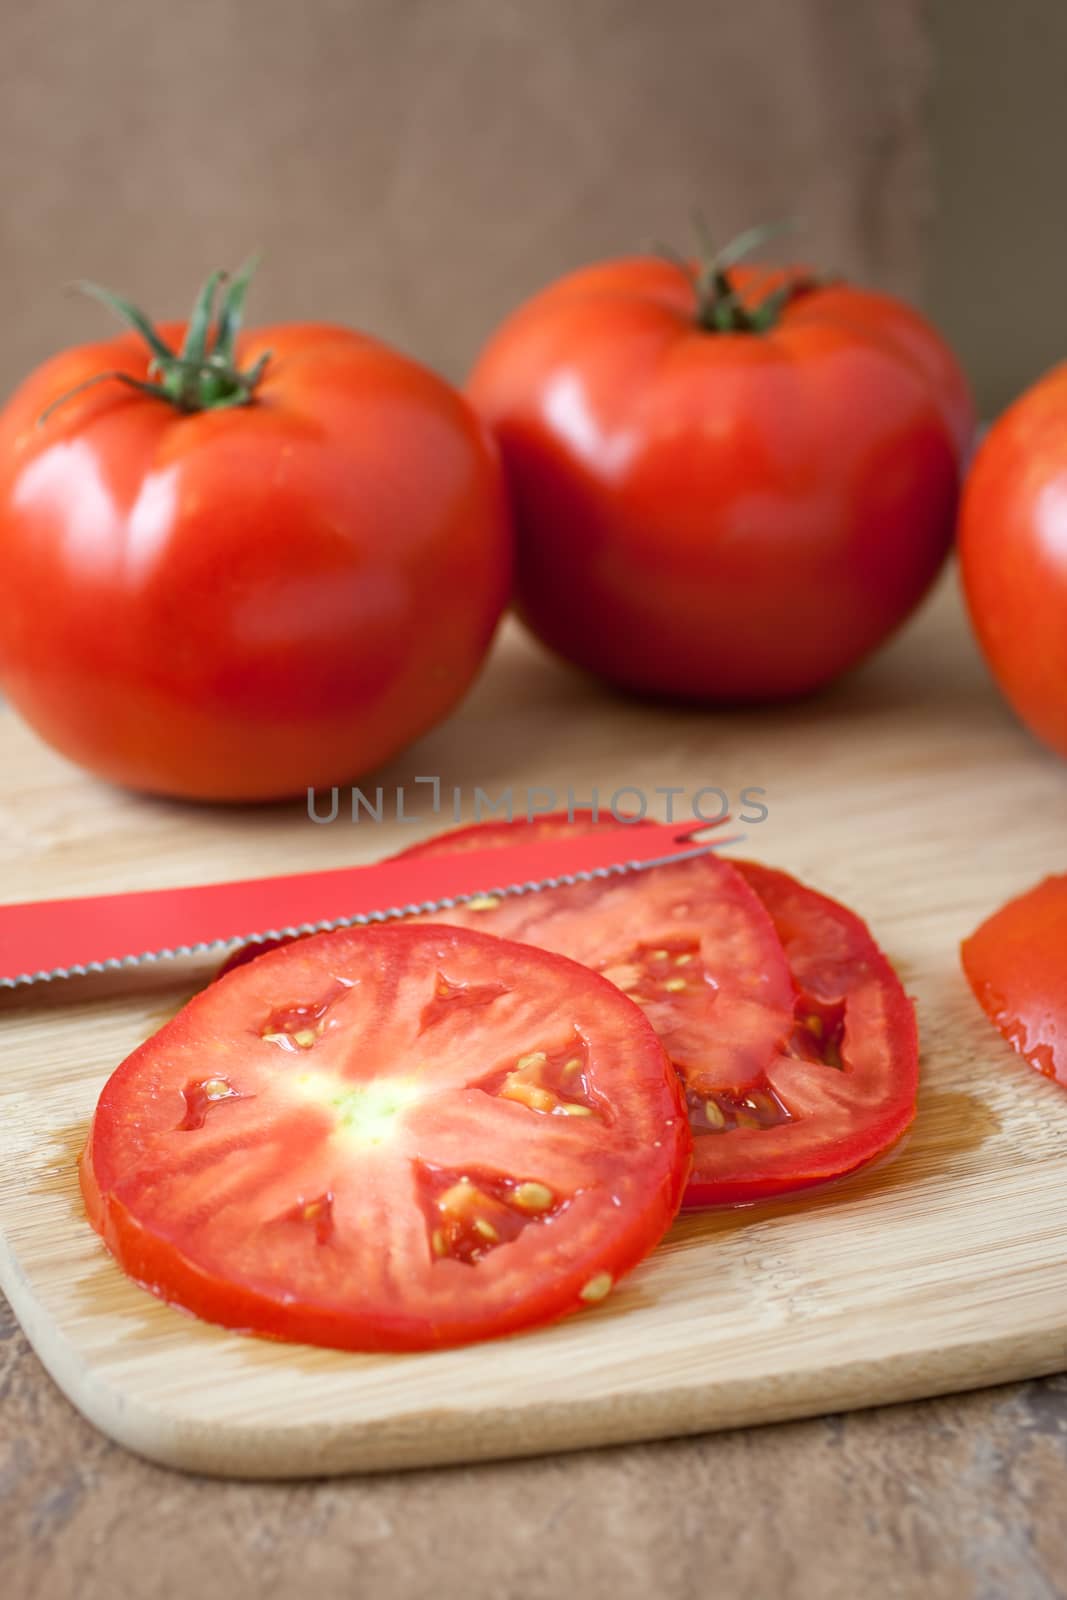 Sliced and Fresh Tomatoes by SouthernLightStudios